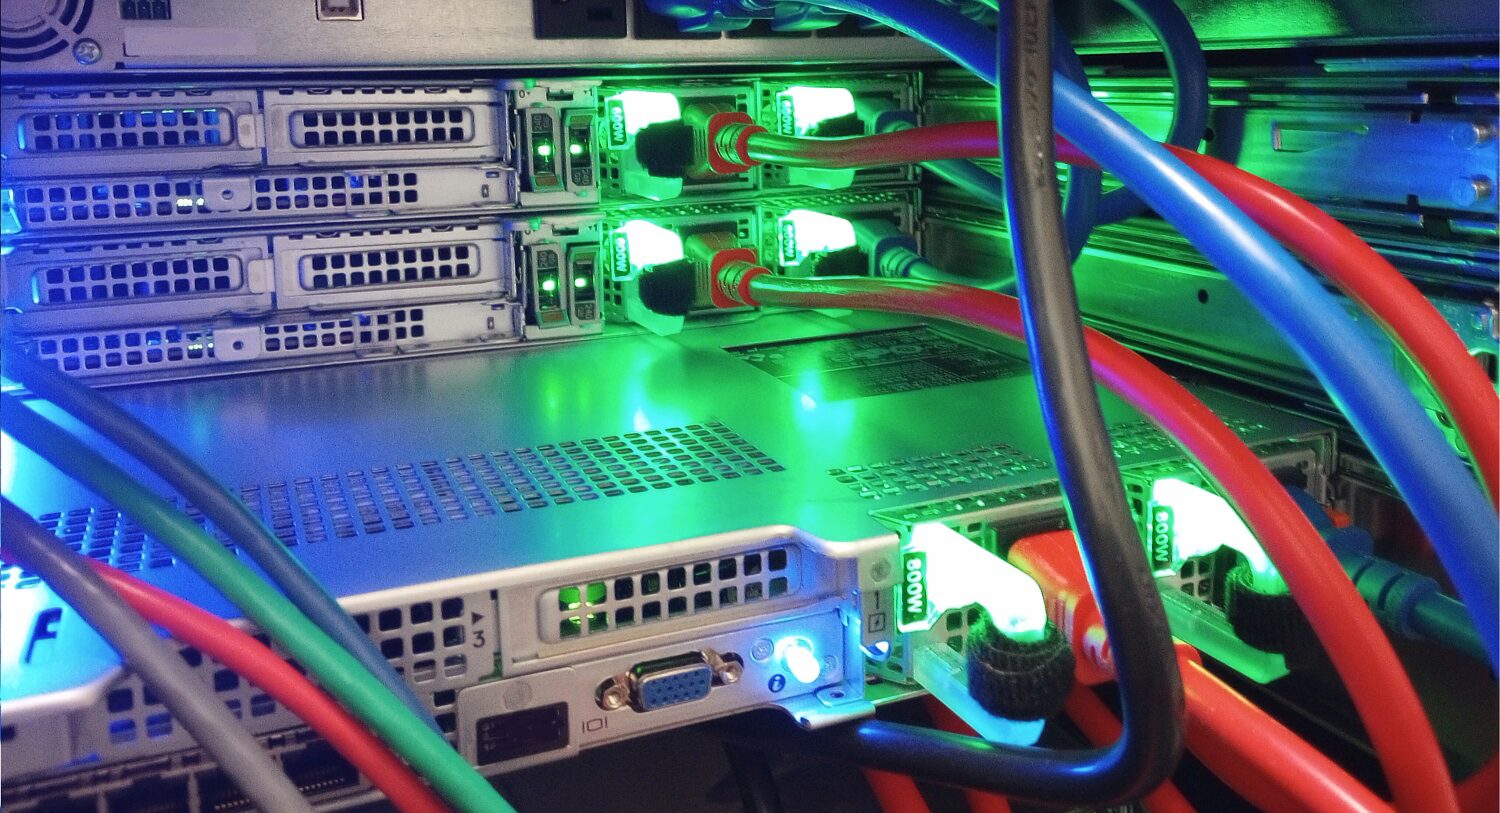 Rackmount Servers with Redundant Power and Color Coded Power Whips